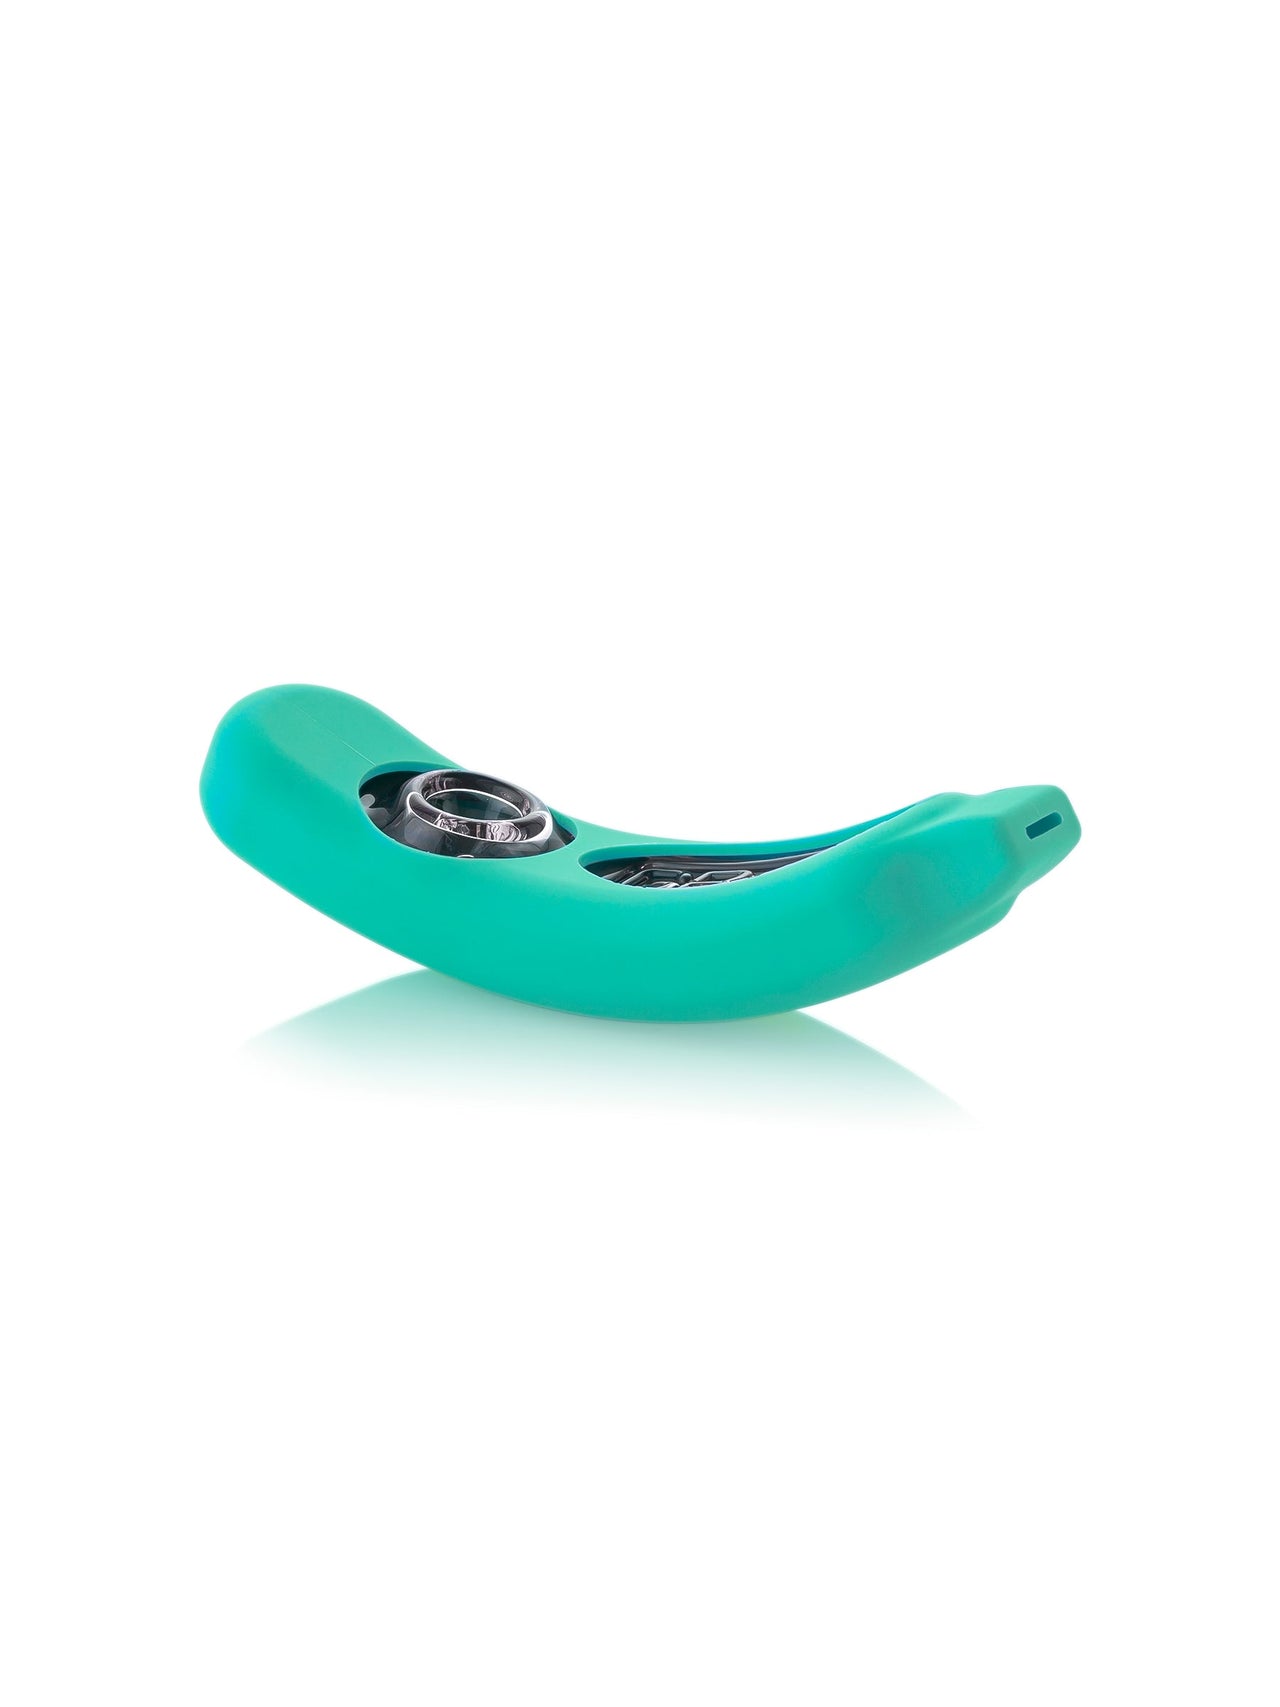 GRAV® Rocker Steamroller with Silicone Skin (Various Colors)